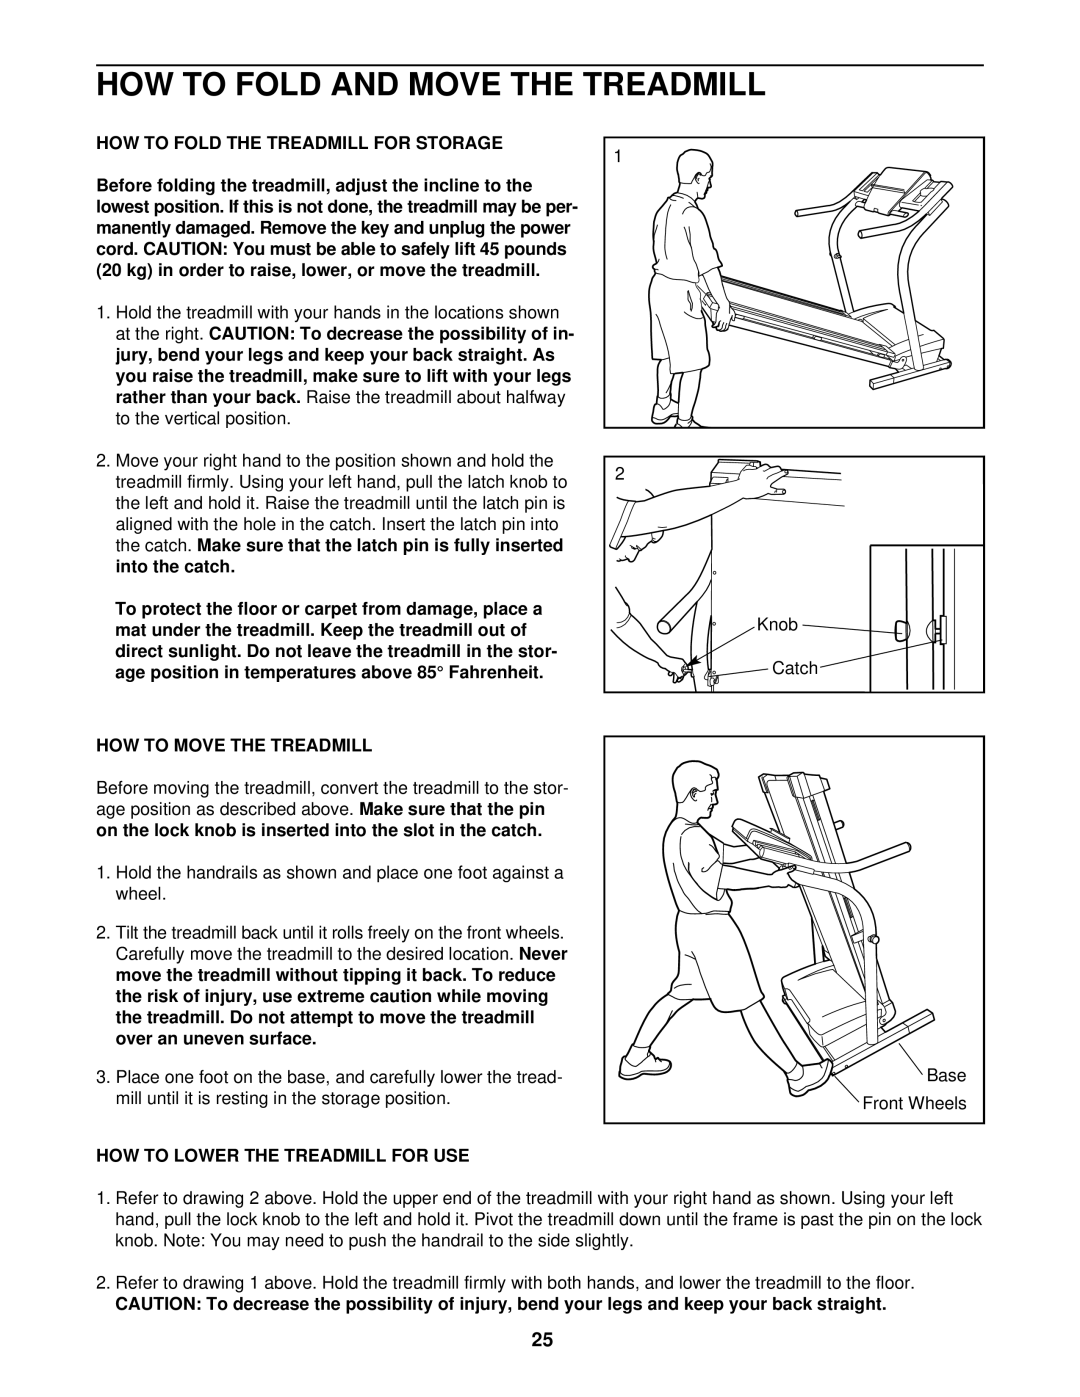 NordicTrack NTTL10510 How To Fold And Move The Treadmill, How To Fold The Treadmill For Storage, How To Move The Treadmill 